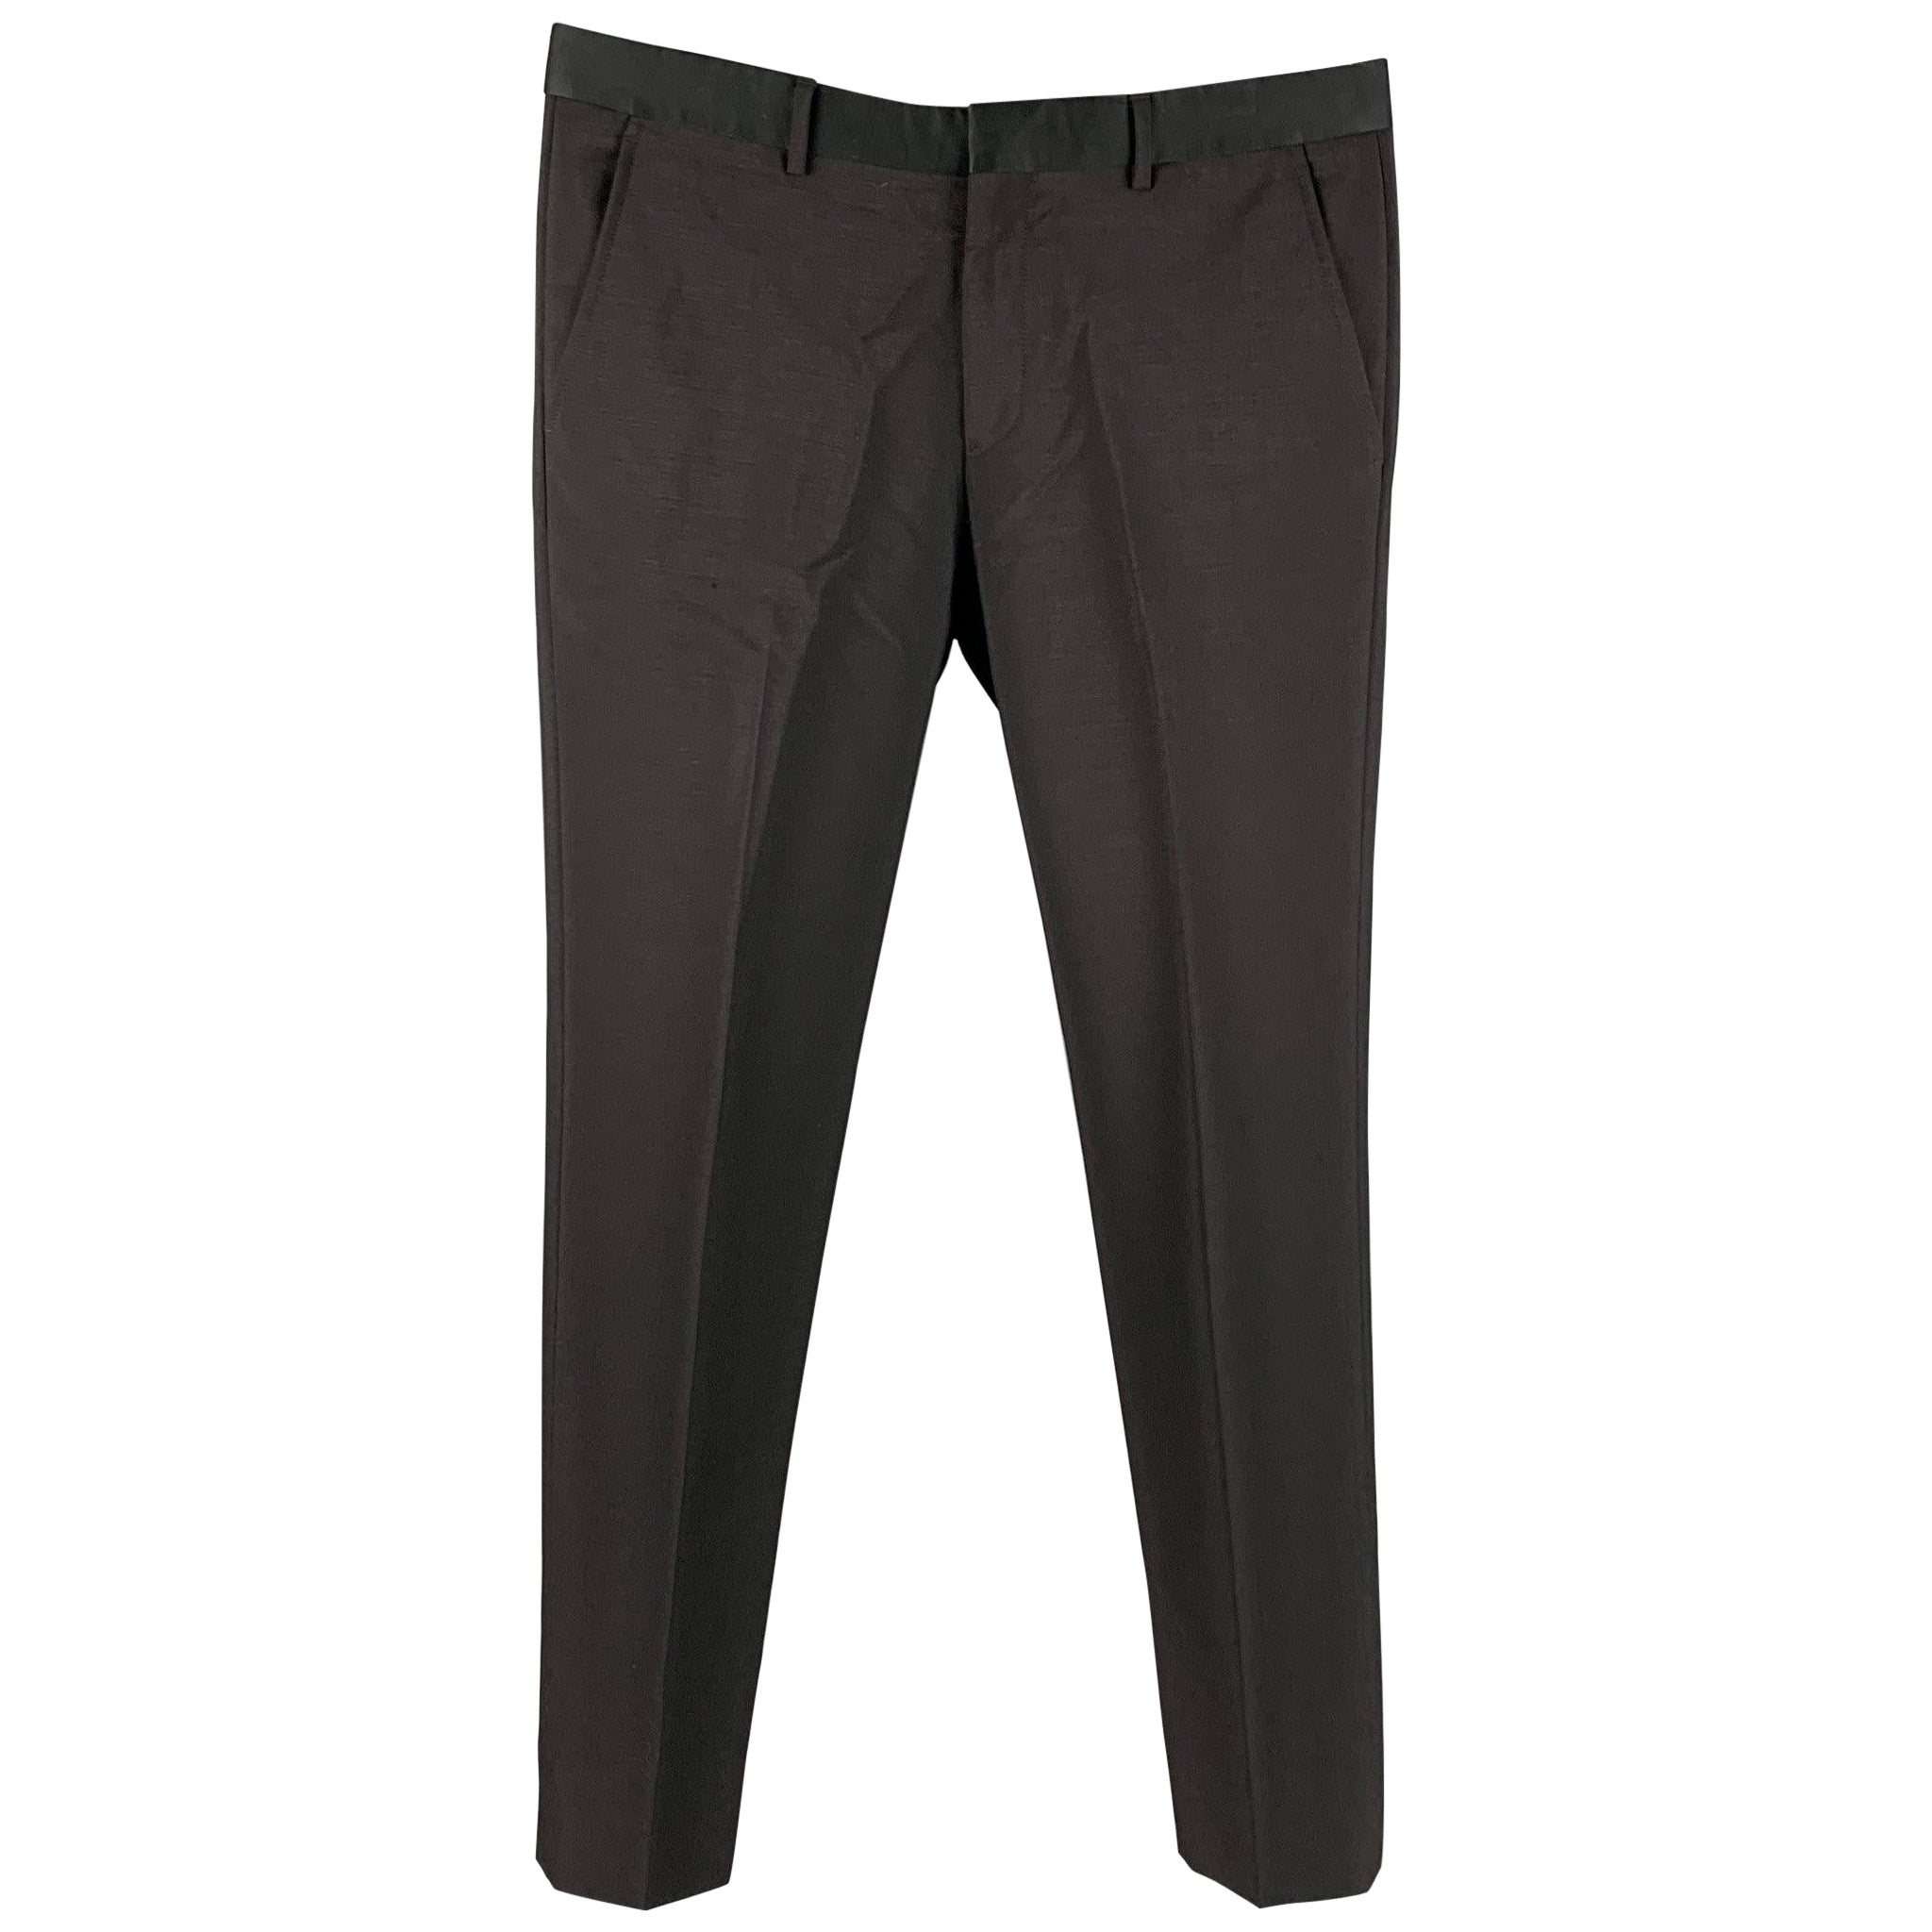 EMPORIO ARMANI Size 32 Black Solid Mohair Wool Tuxedo Dress Pants For Sale